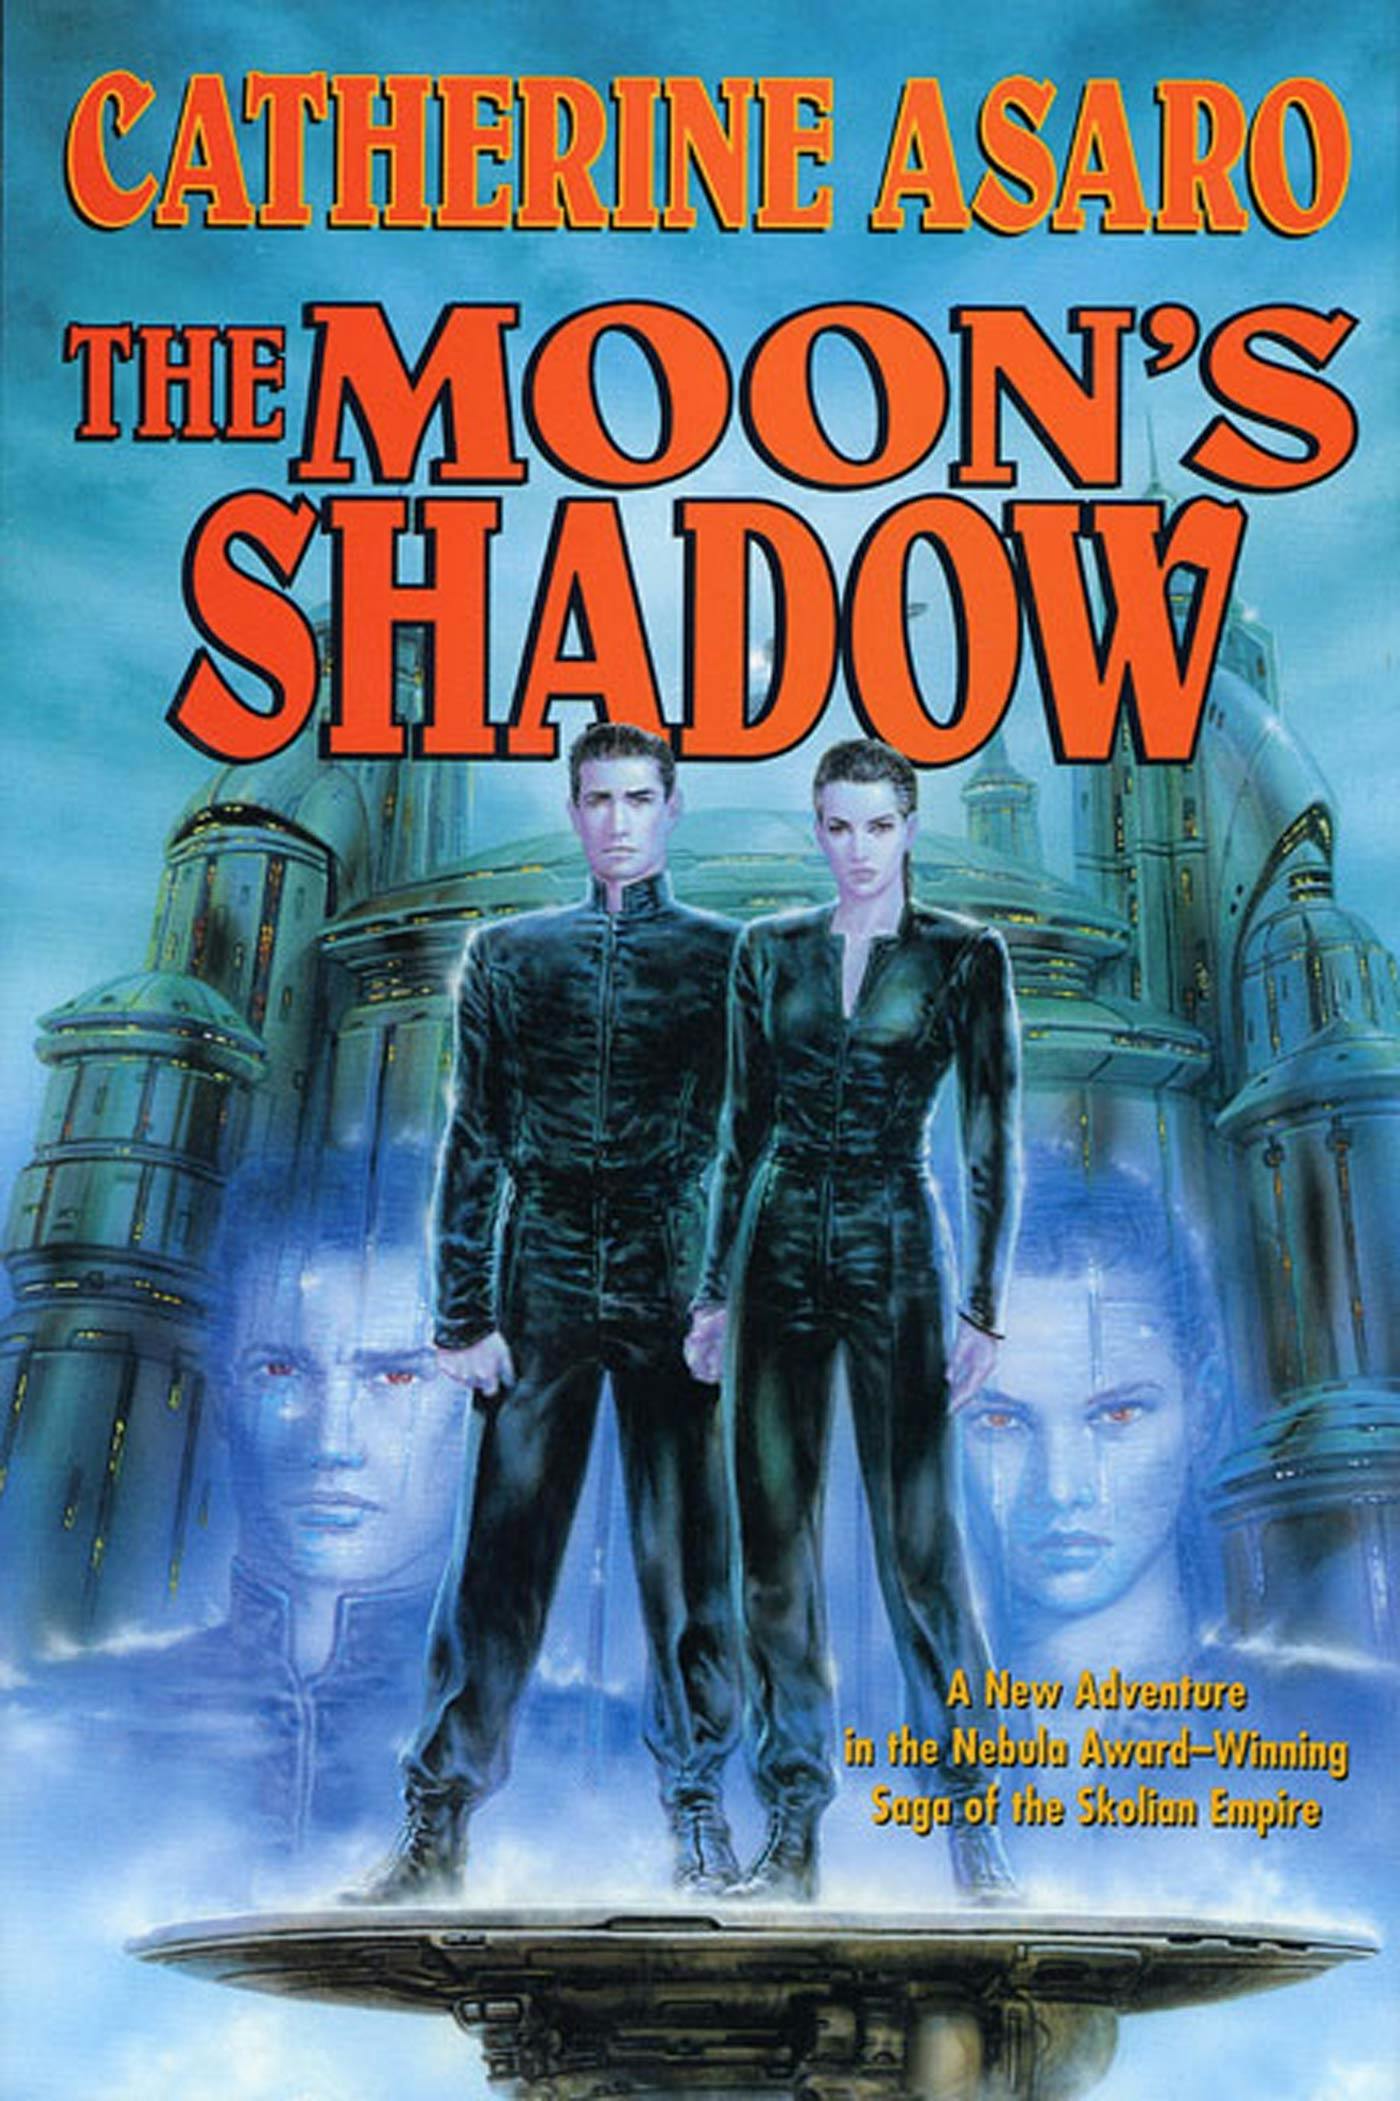 Cover for the book titled as: The Moon's Shadow